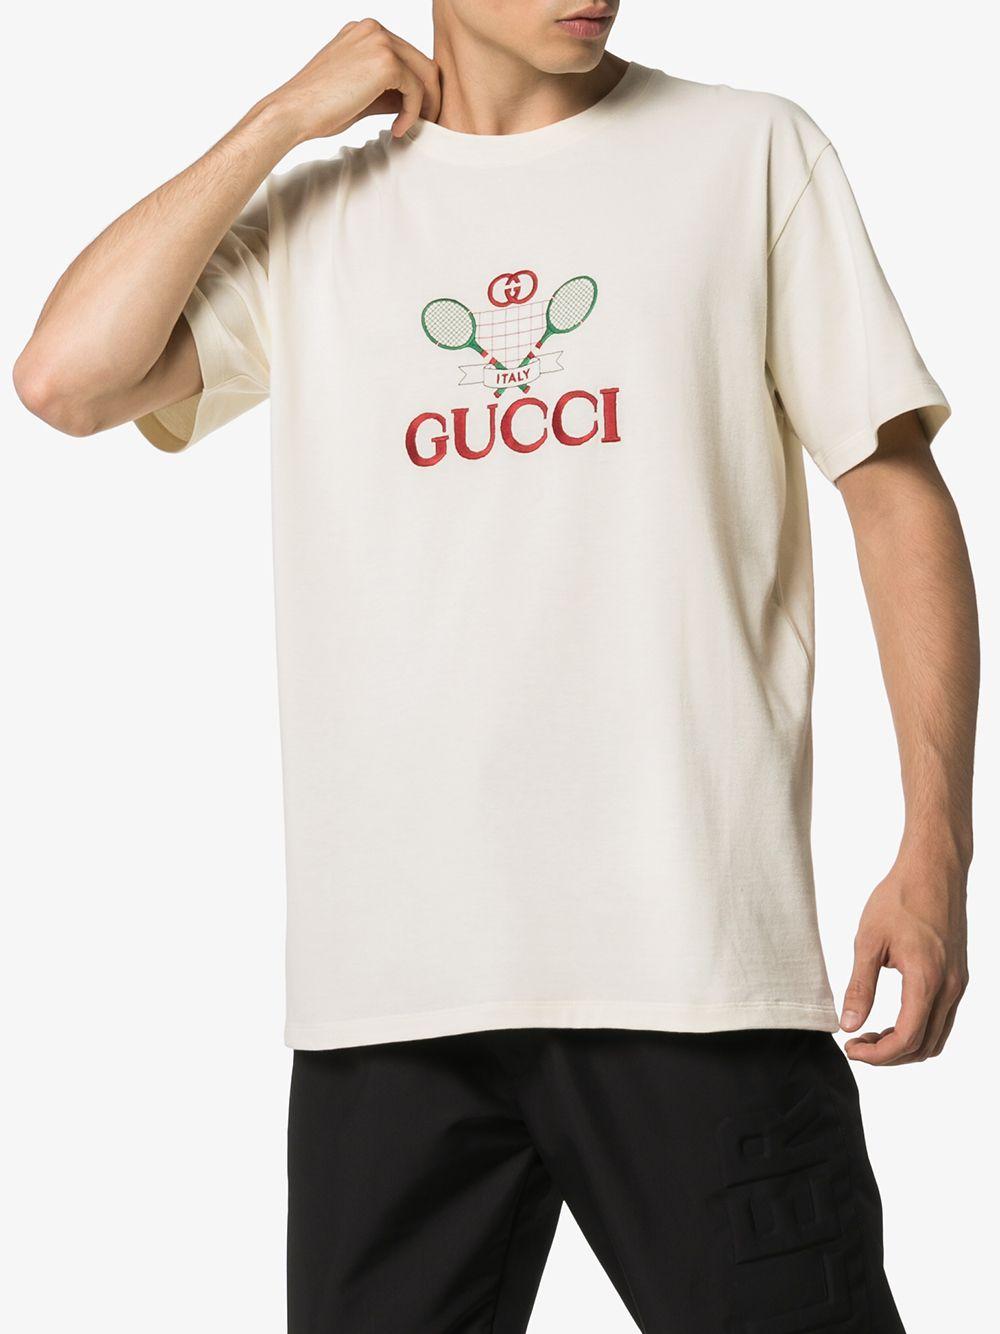 Gucci Cotton Oversize Tennis T-shirt in White for Men - Lyst